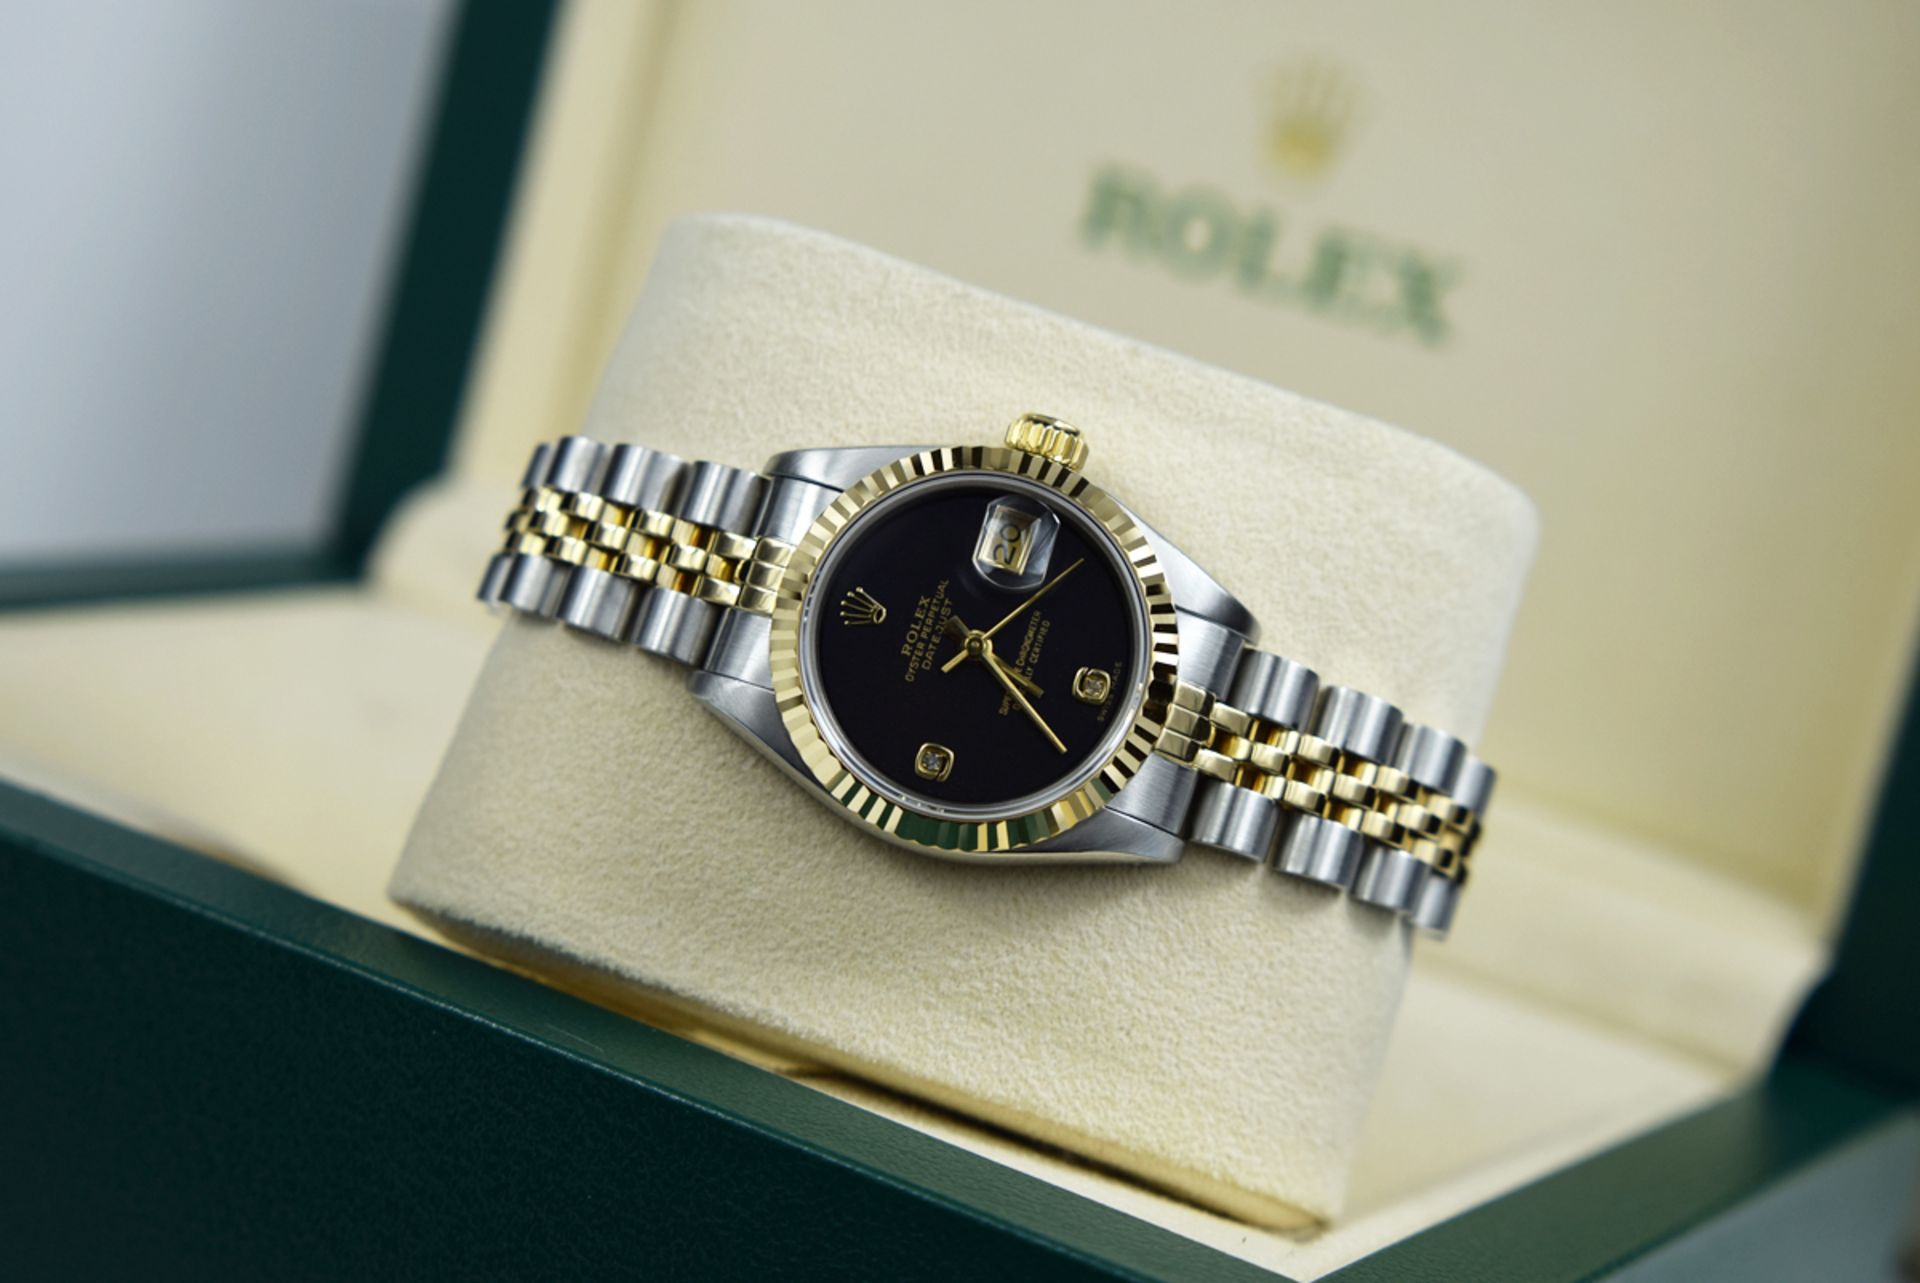 ROLEX 'LADY DATEJUST' 26MM - STEEL & 18K GOLD WITH ✦ RARE DIAMOND DIAL - Image 5 of 10